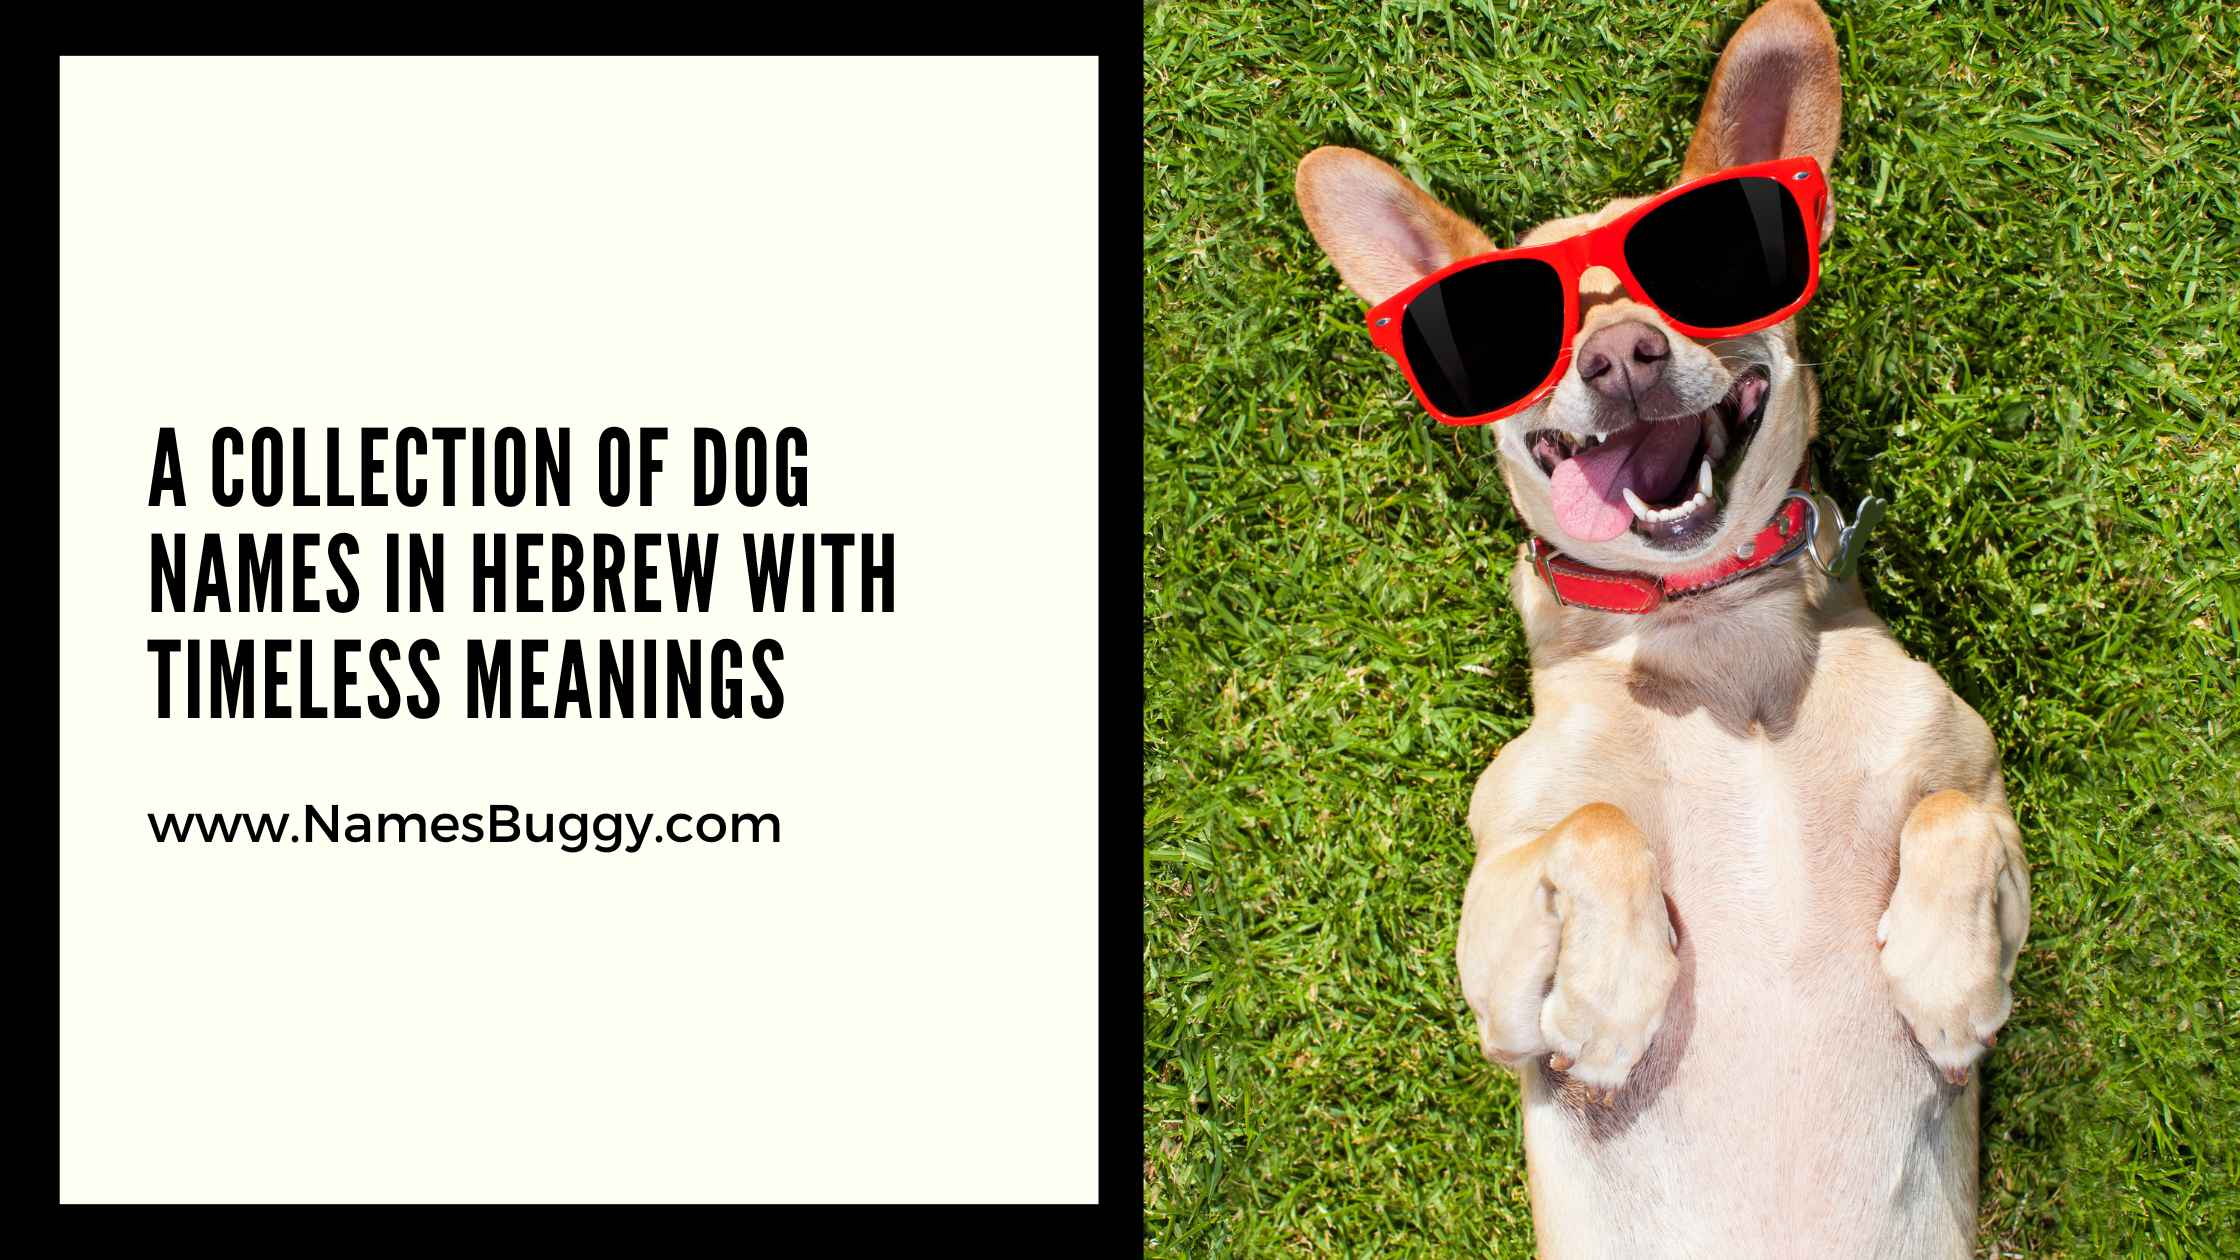 A Collection of Dog Names in Hebrew with Timeless Meanings